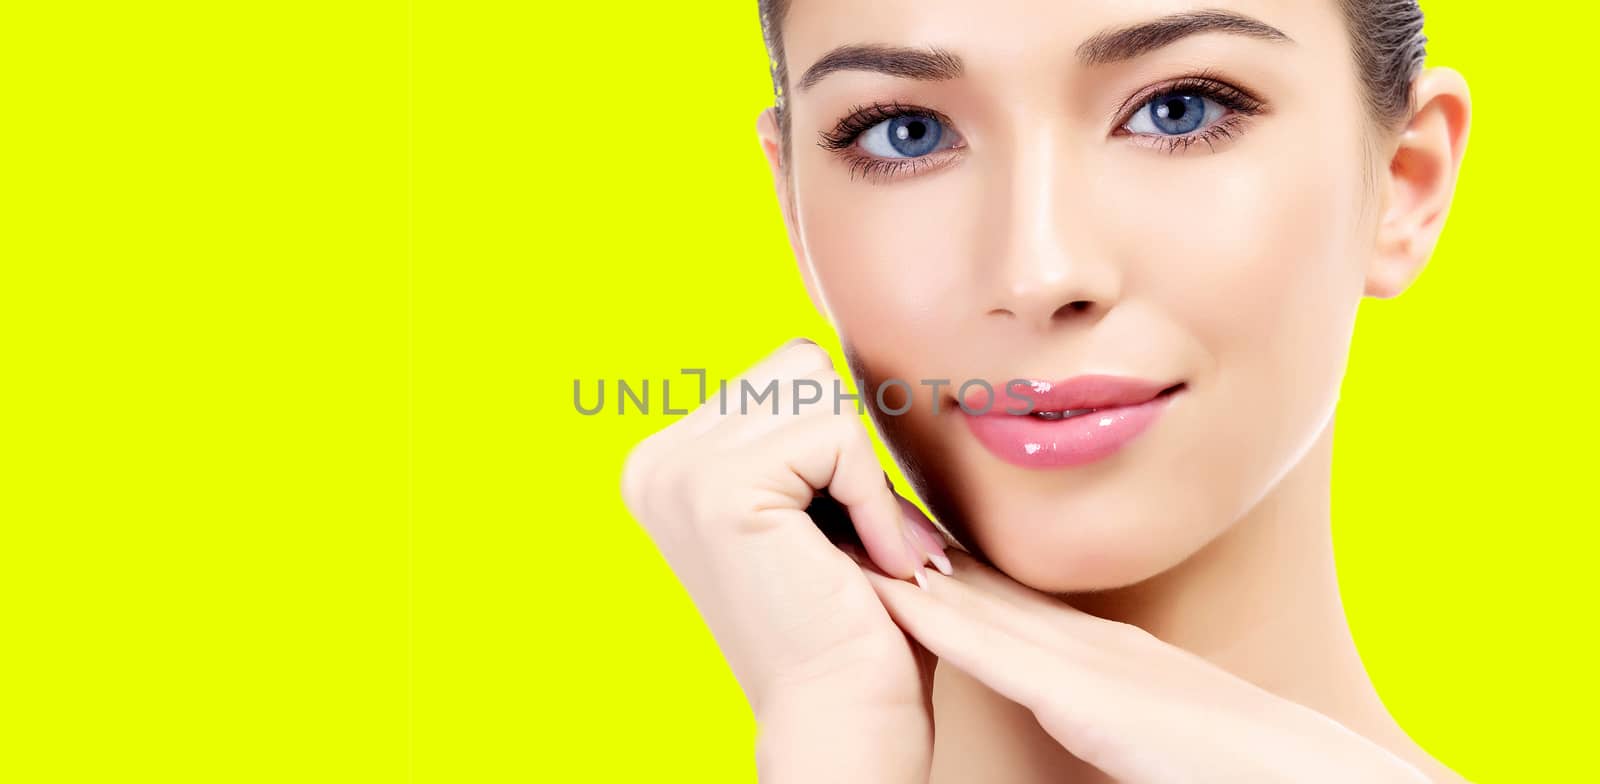 Pretty woman against a yellow background with copyspace